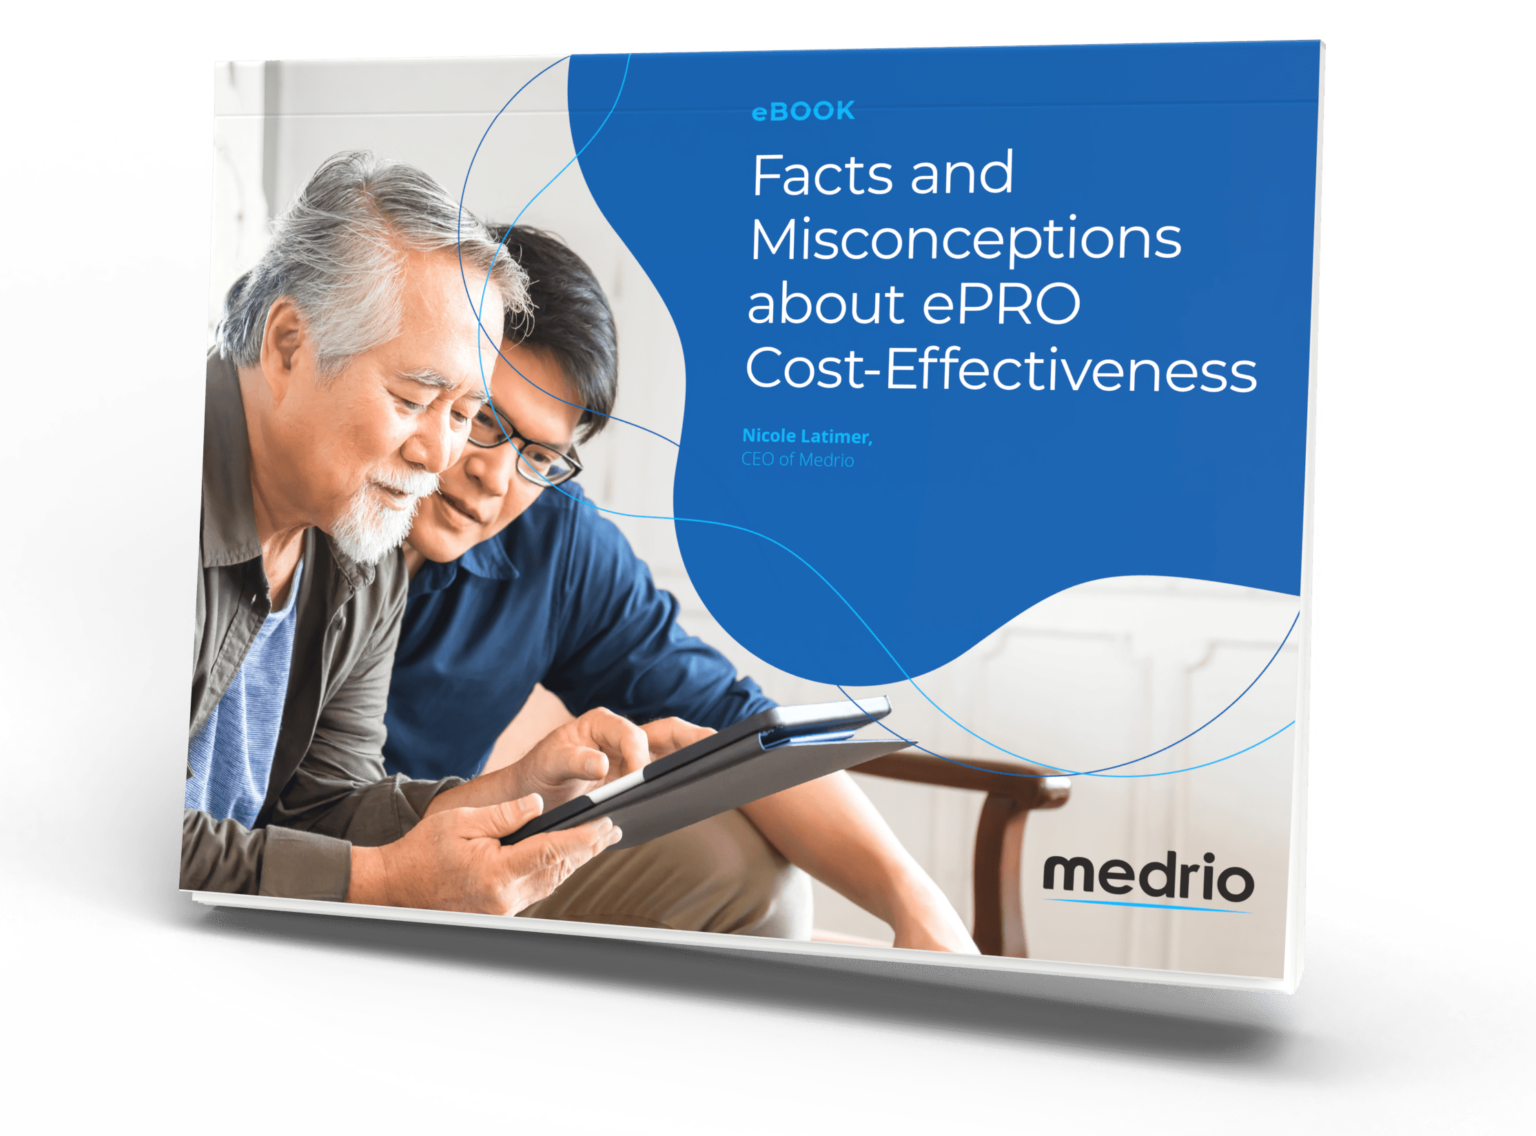 eBook FactsMisconceptions About ePRO cover